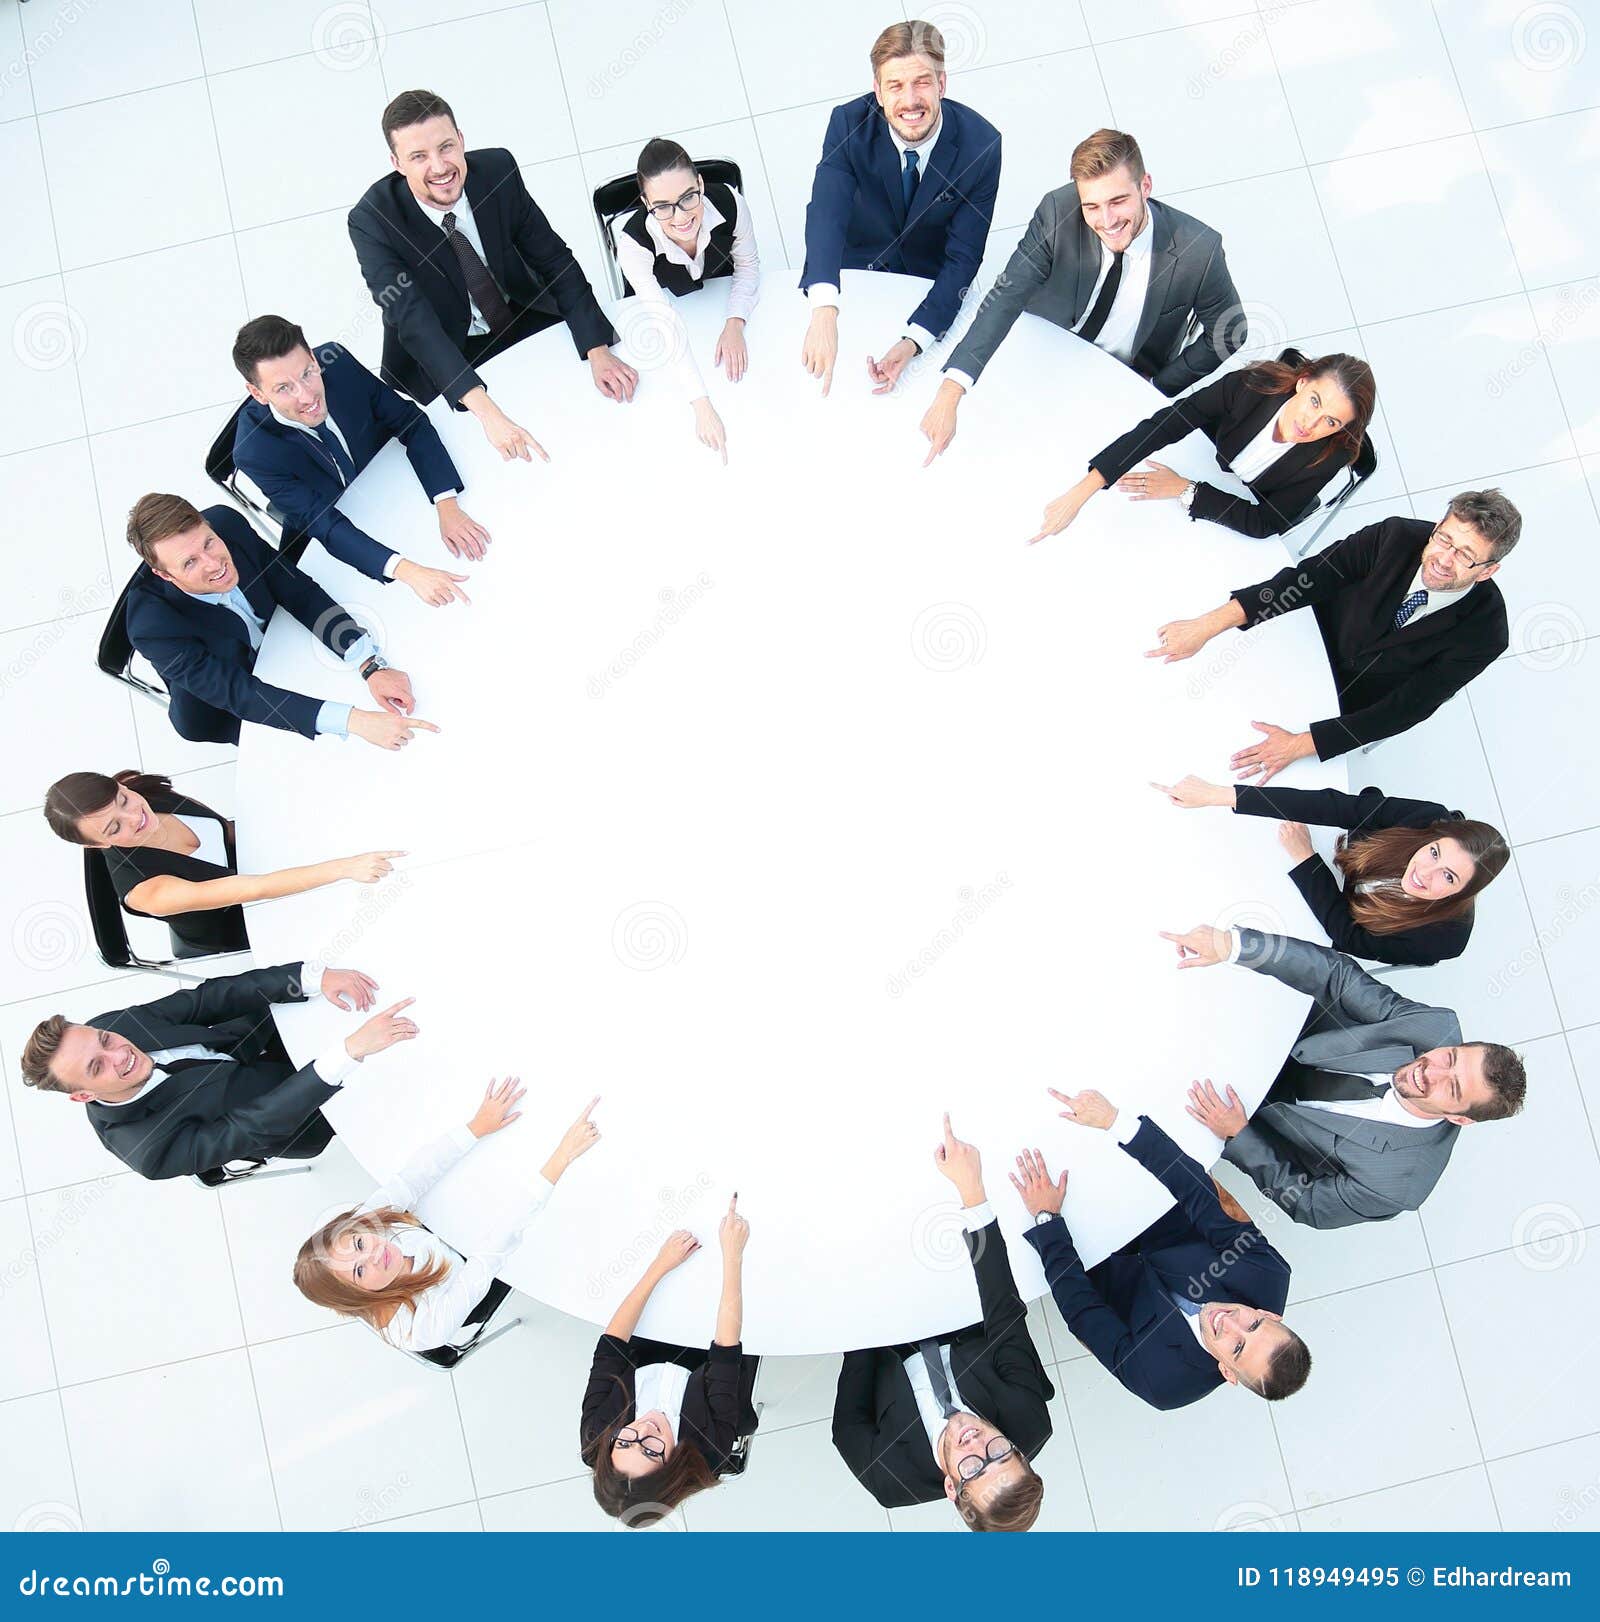 Group Of Business People Sitting At The Round Table The Business Concept Stock Image Image Of Partners